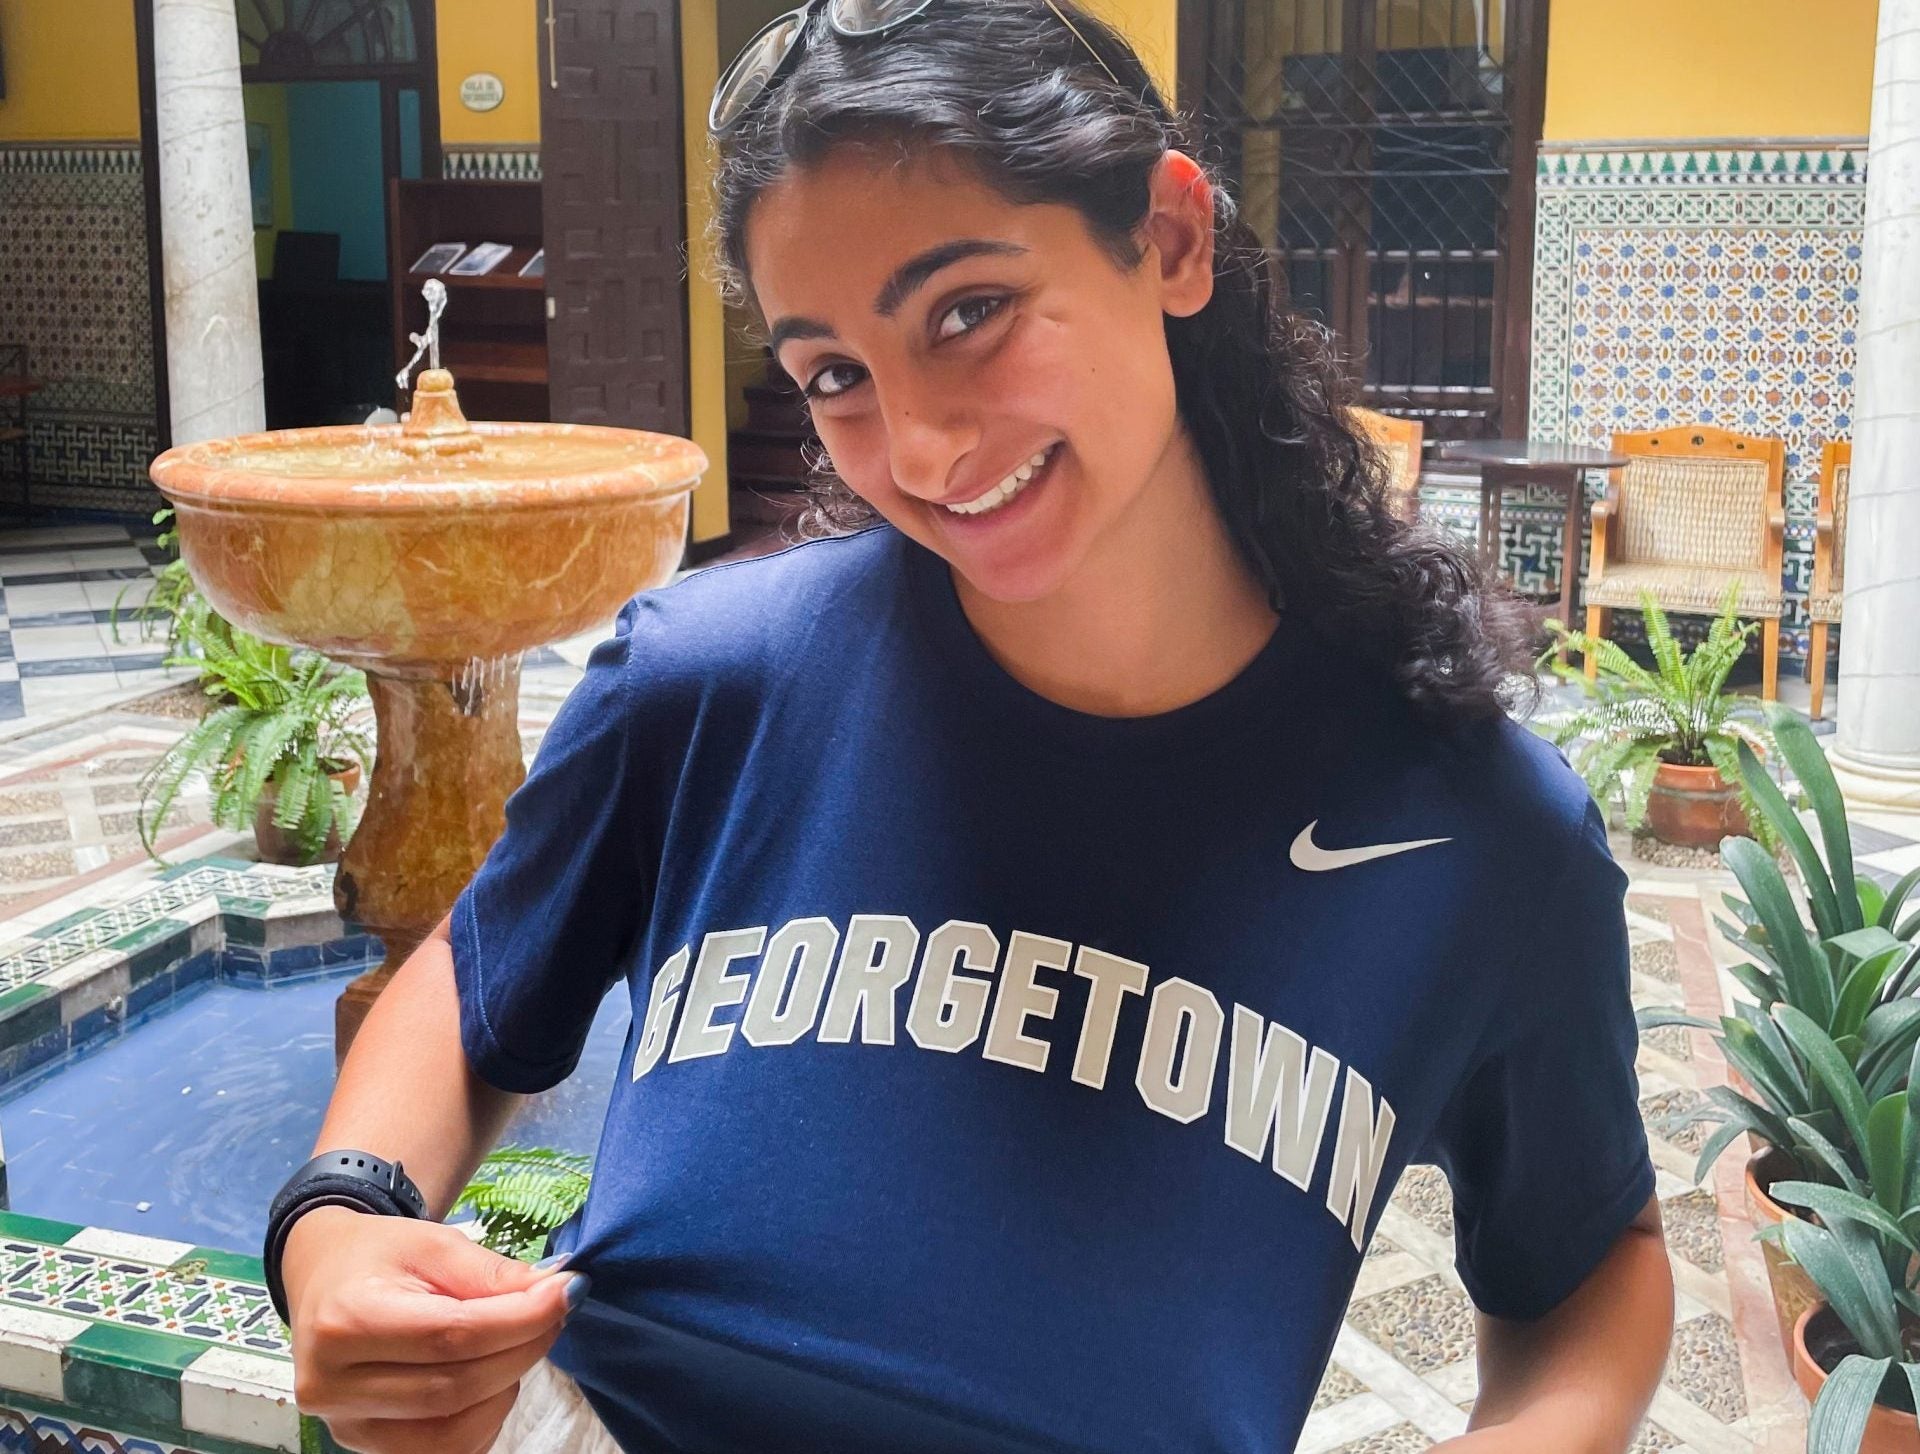 Young woman wearing a blue Georgetown T-shirt holds it out to display the "Georgetown" graphic